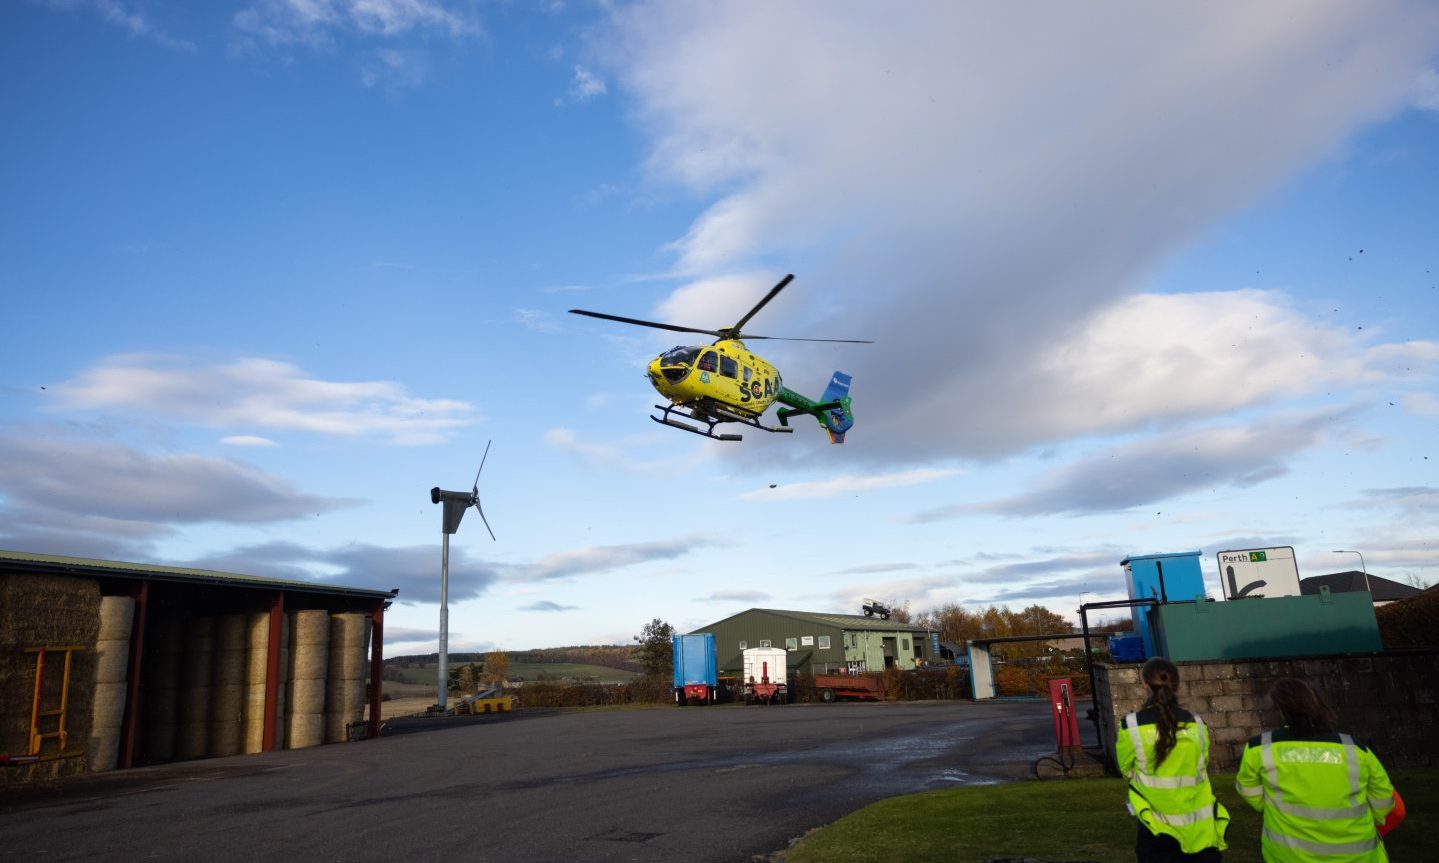 Scotland's Charity Air Ambulance in Aberuthven after a child was hit by a car.